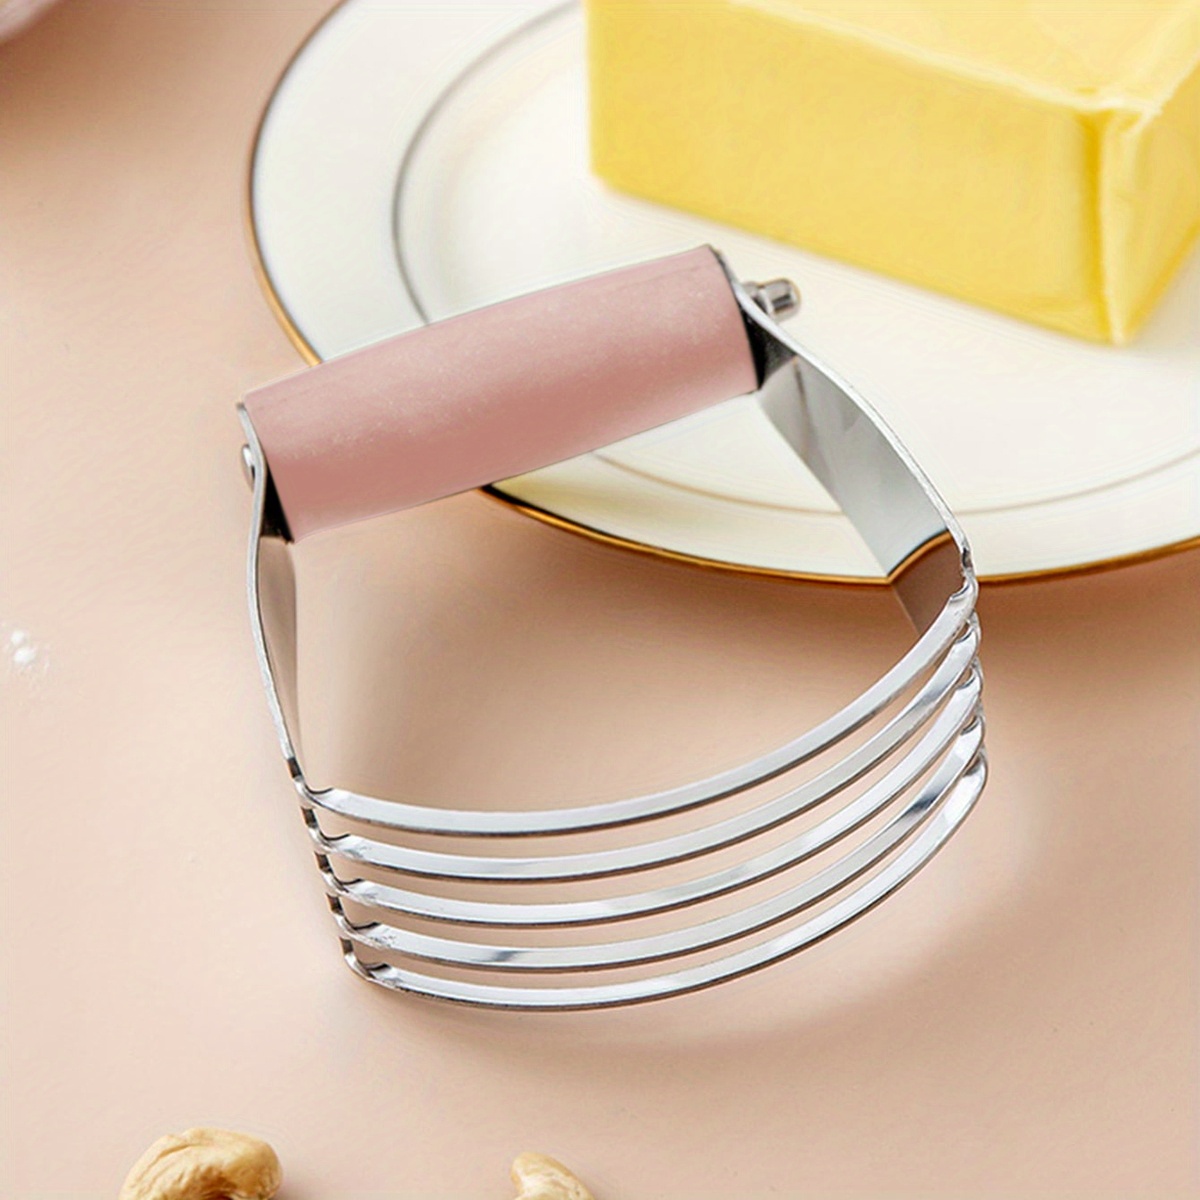 Baking Tools and Gadgets < Downtown Dough